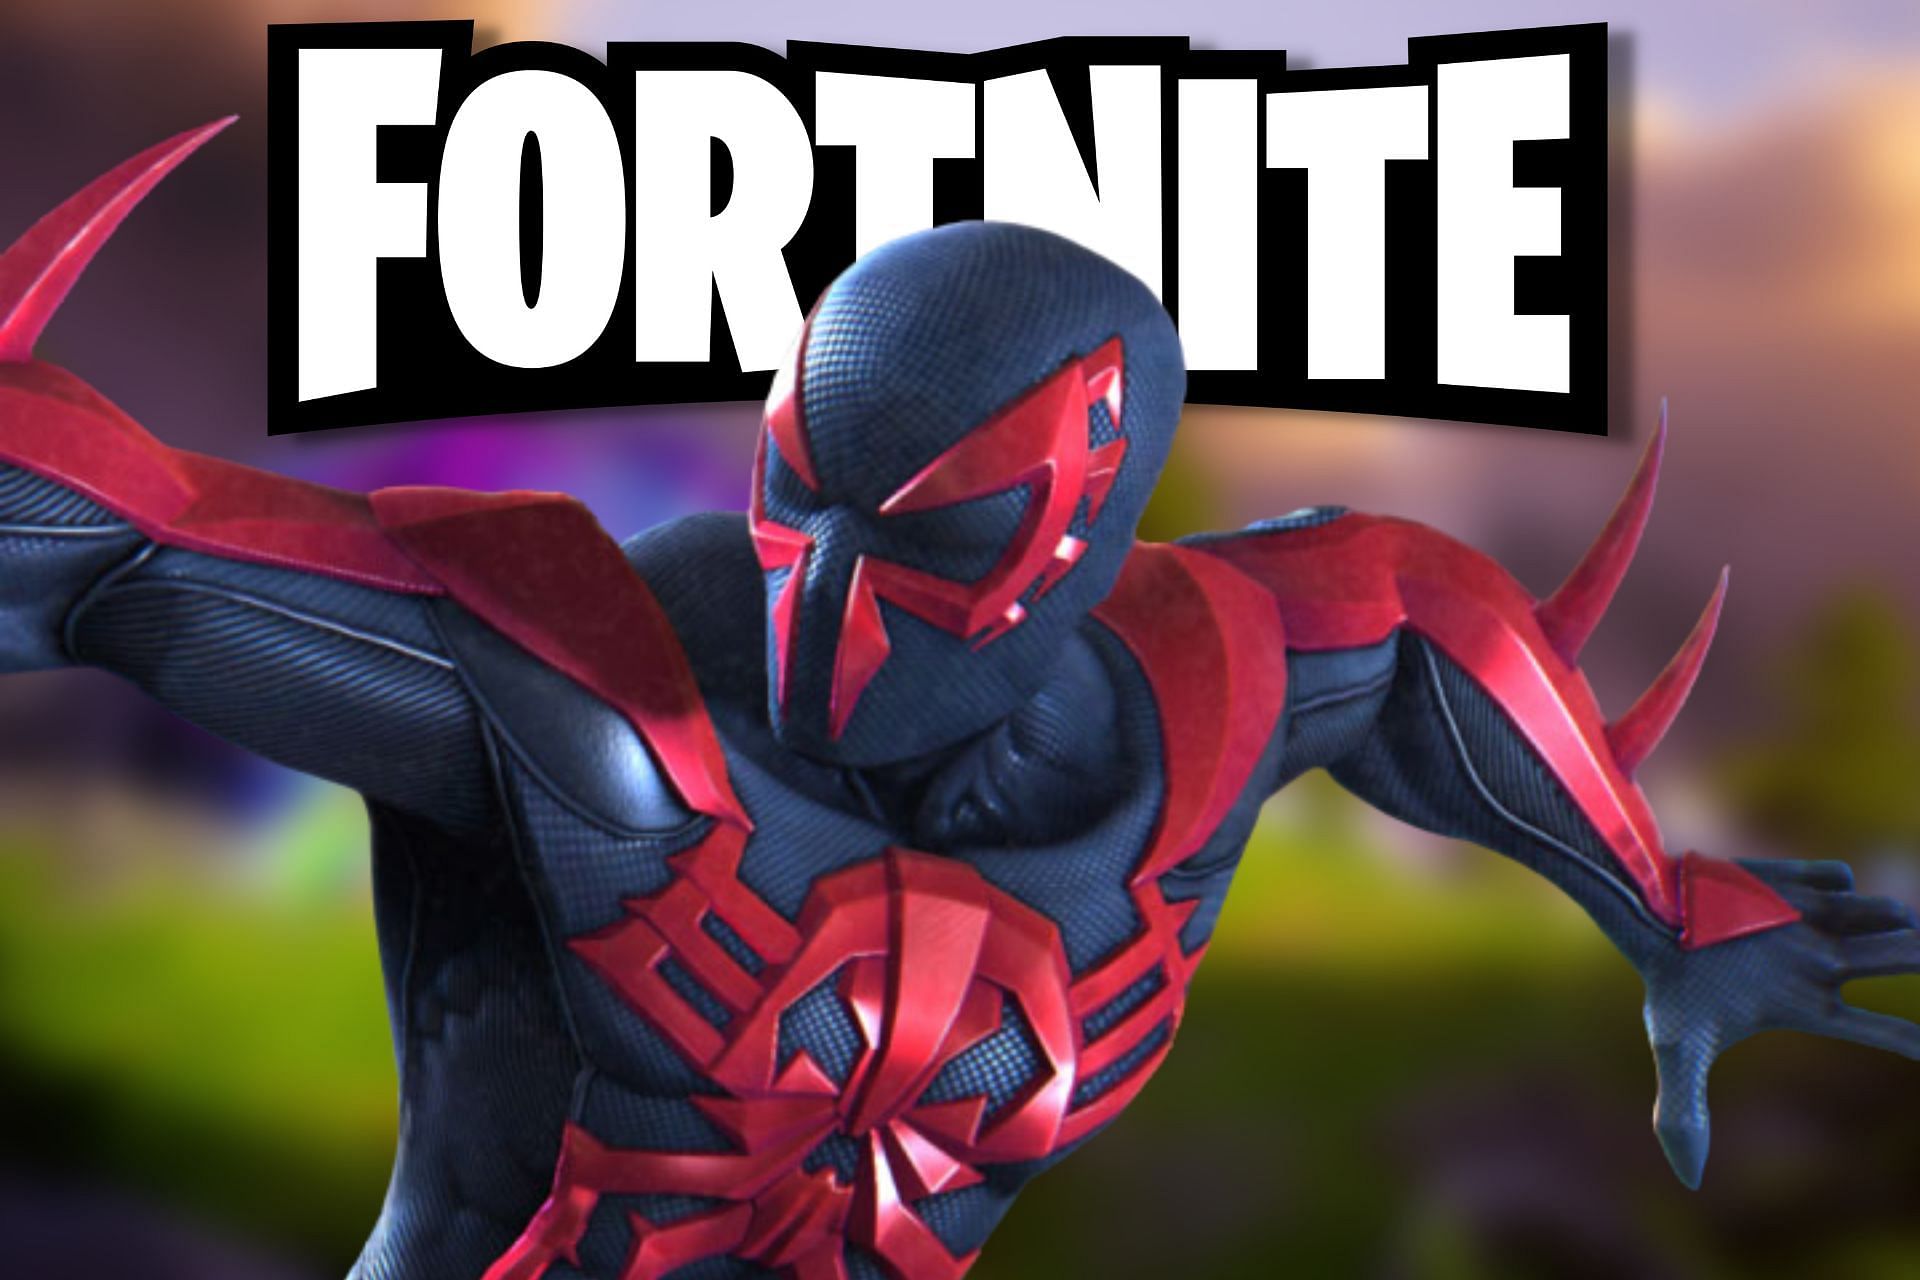 How to get the Marvel Comic Spider-man outfit in Fortnite